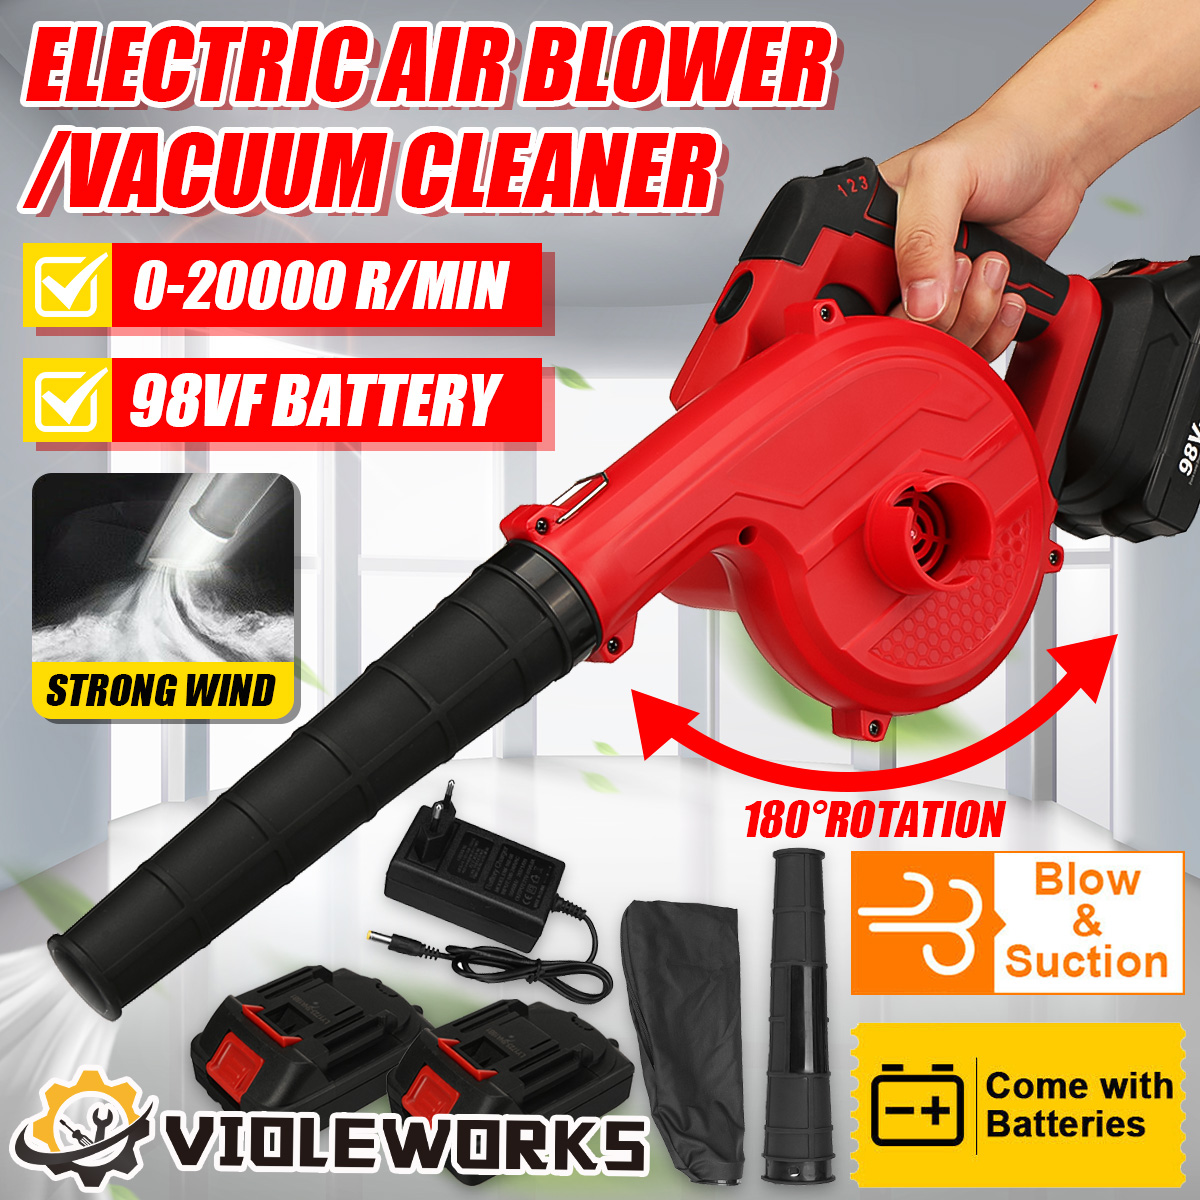 VIOLEWORKS-98VF-2-IN-1-Cordless-180deg-Rotation-Electric-Air-Blower--Suction-Handheld-Leaf-Computer--1920391-1